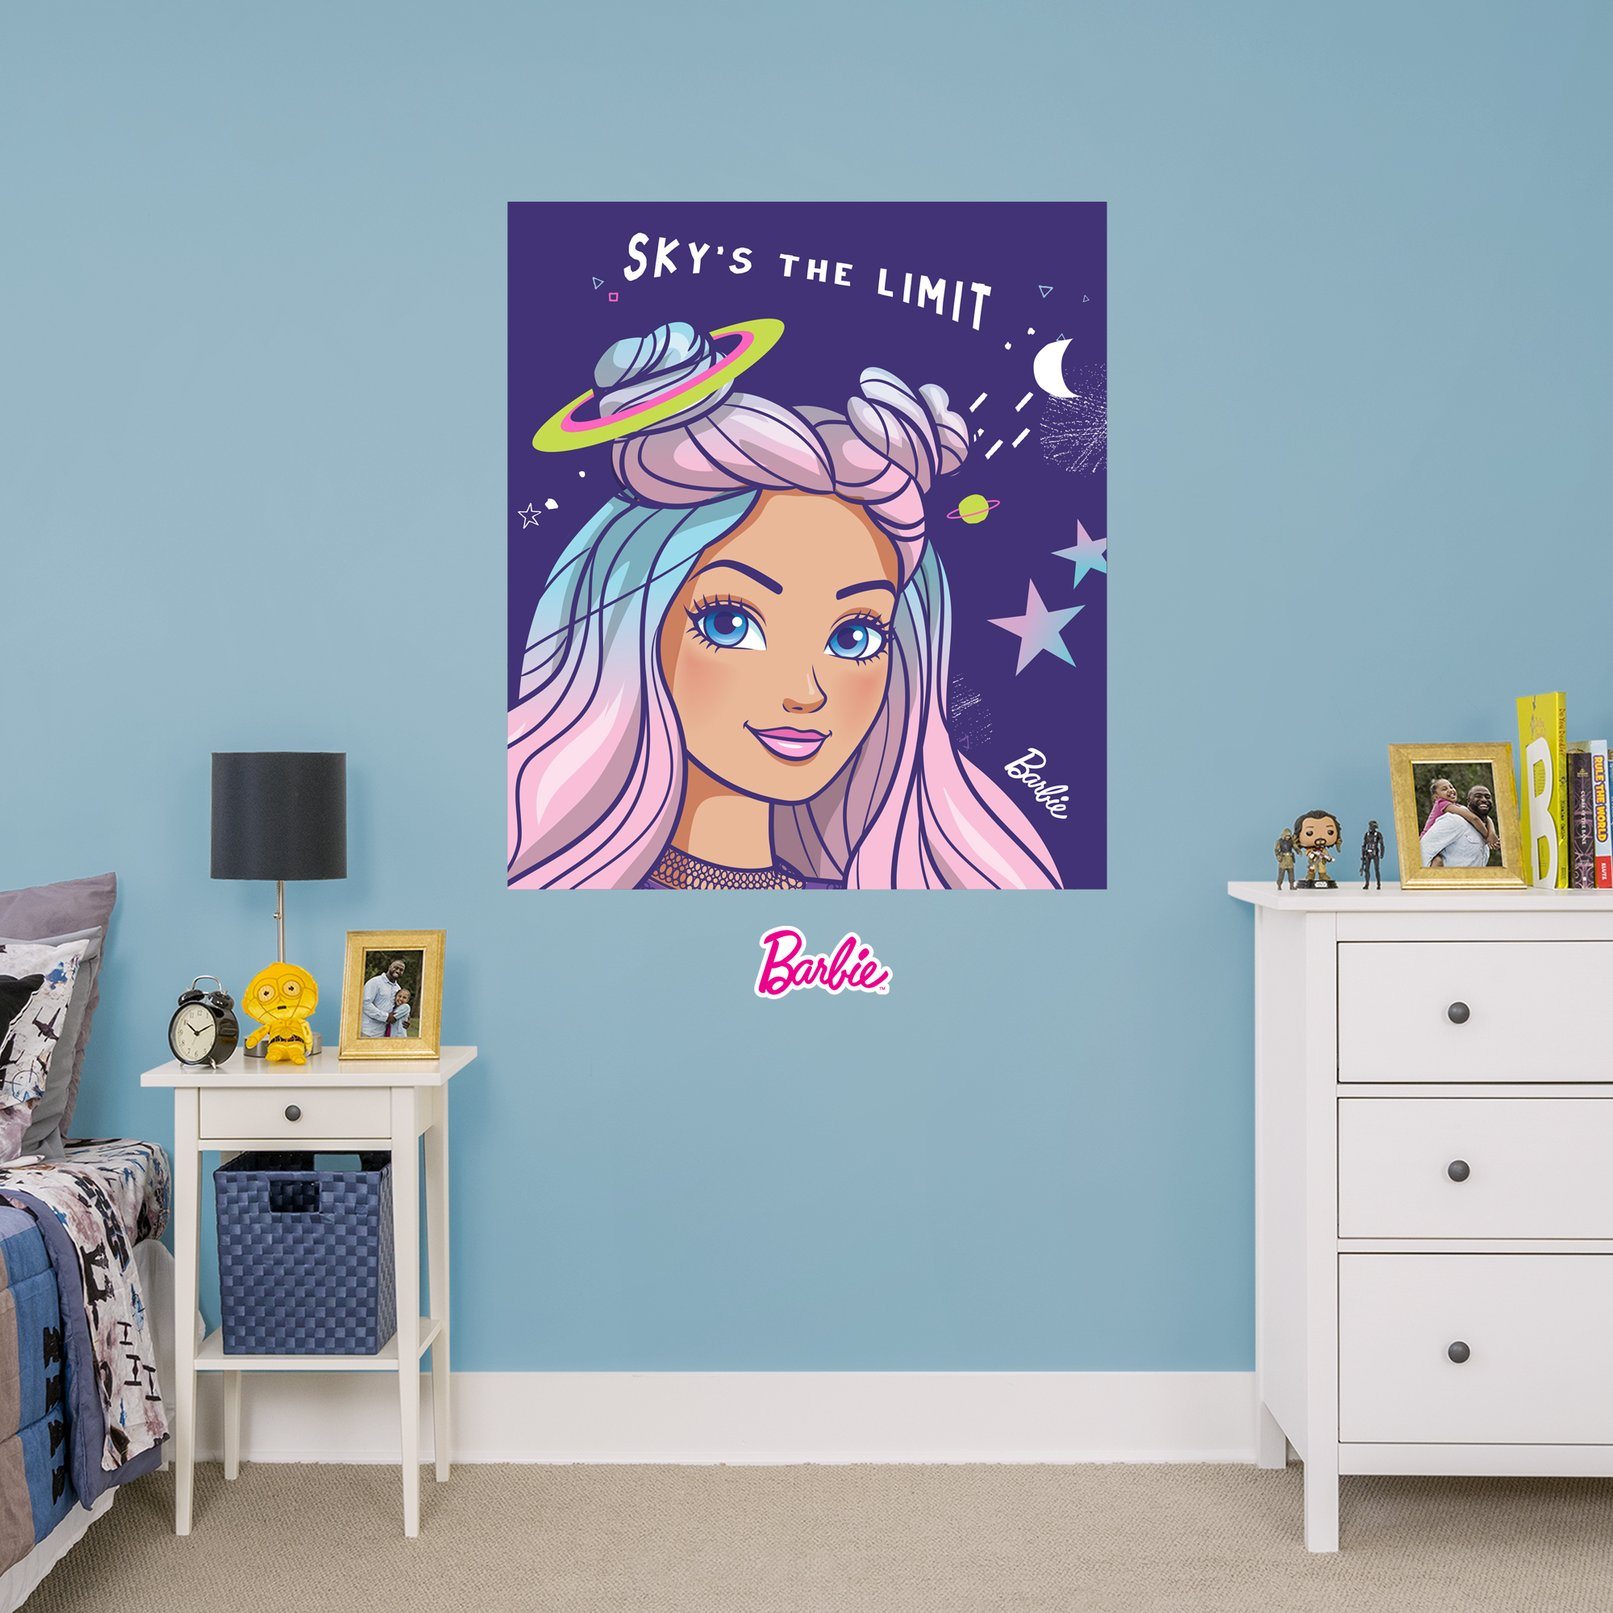 https://fathead.com/collections/barbie-collection/products/1950-00245-003?variant=33573612716120